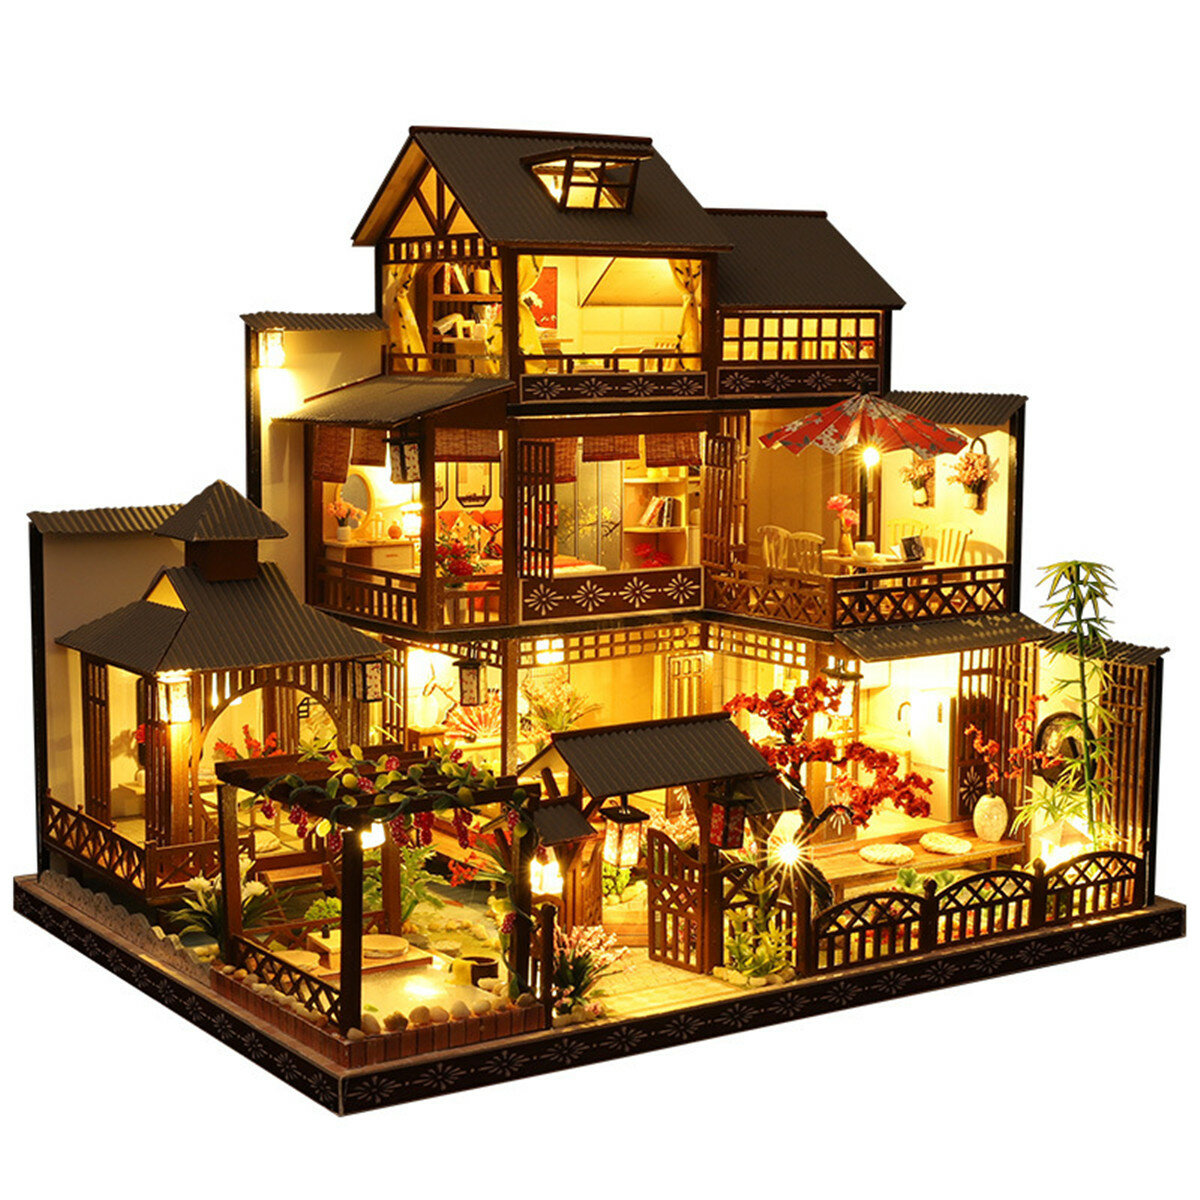 Wooden DIY Japanese Villa Doll House Miniature Kits Handmade Assemble Toy with Furniture LED Light for Gift Collection Home Decor